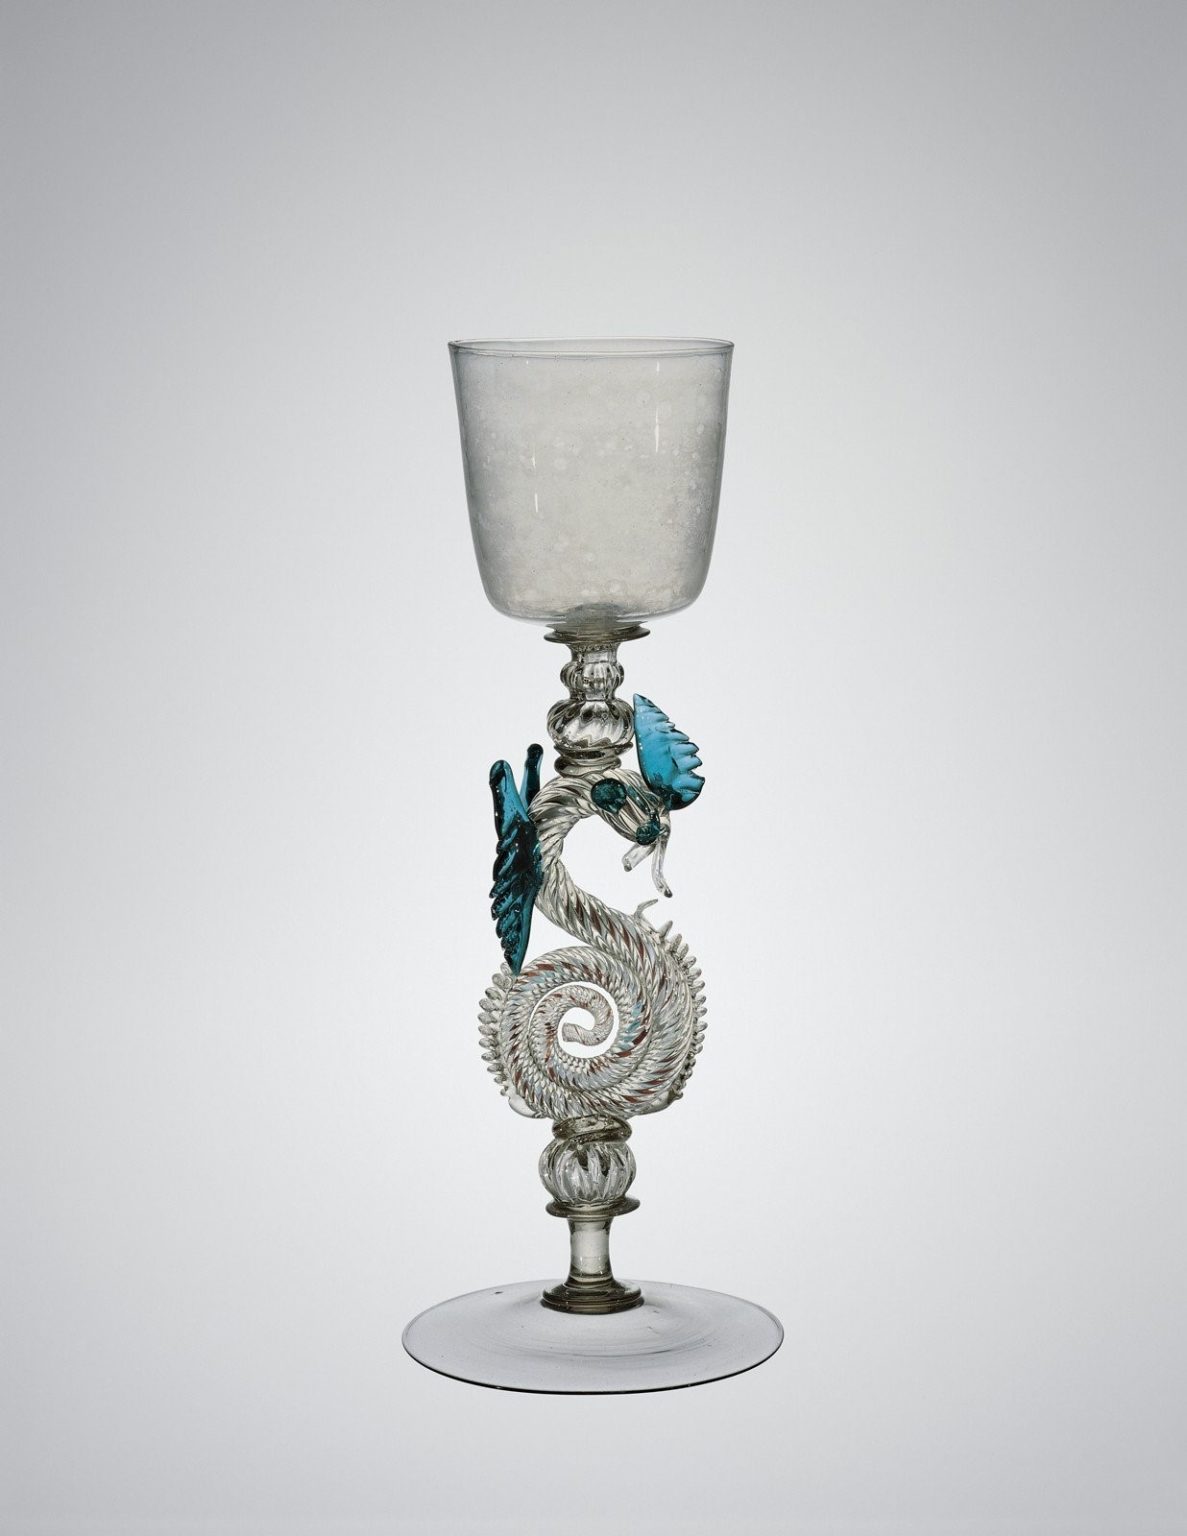 Wineglass (about 1650–1700). CMoG 51.3.118. Image licensed by The Corning Museum of Glass, Corning, NY (www.cmog.org) under CC BY-NC-SA 4.0. 